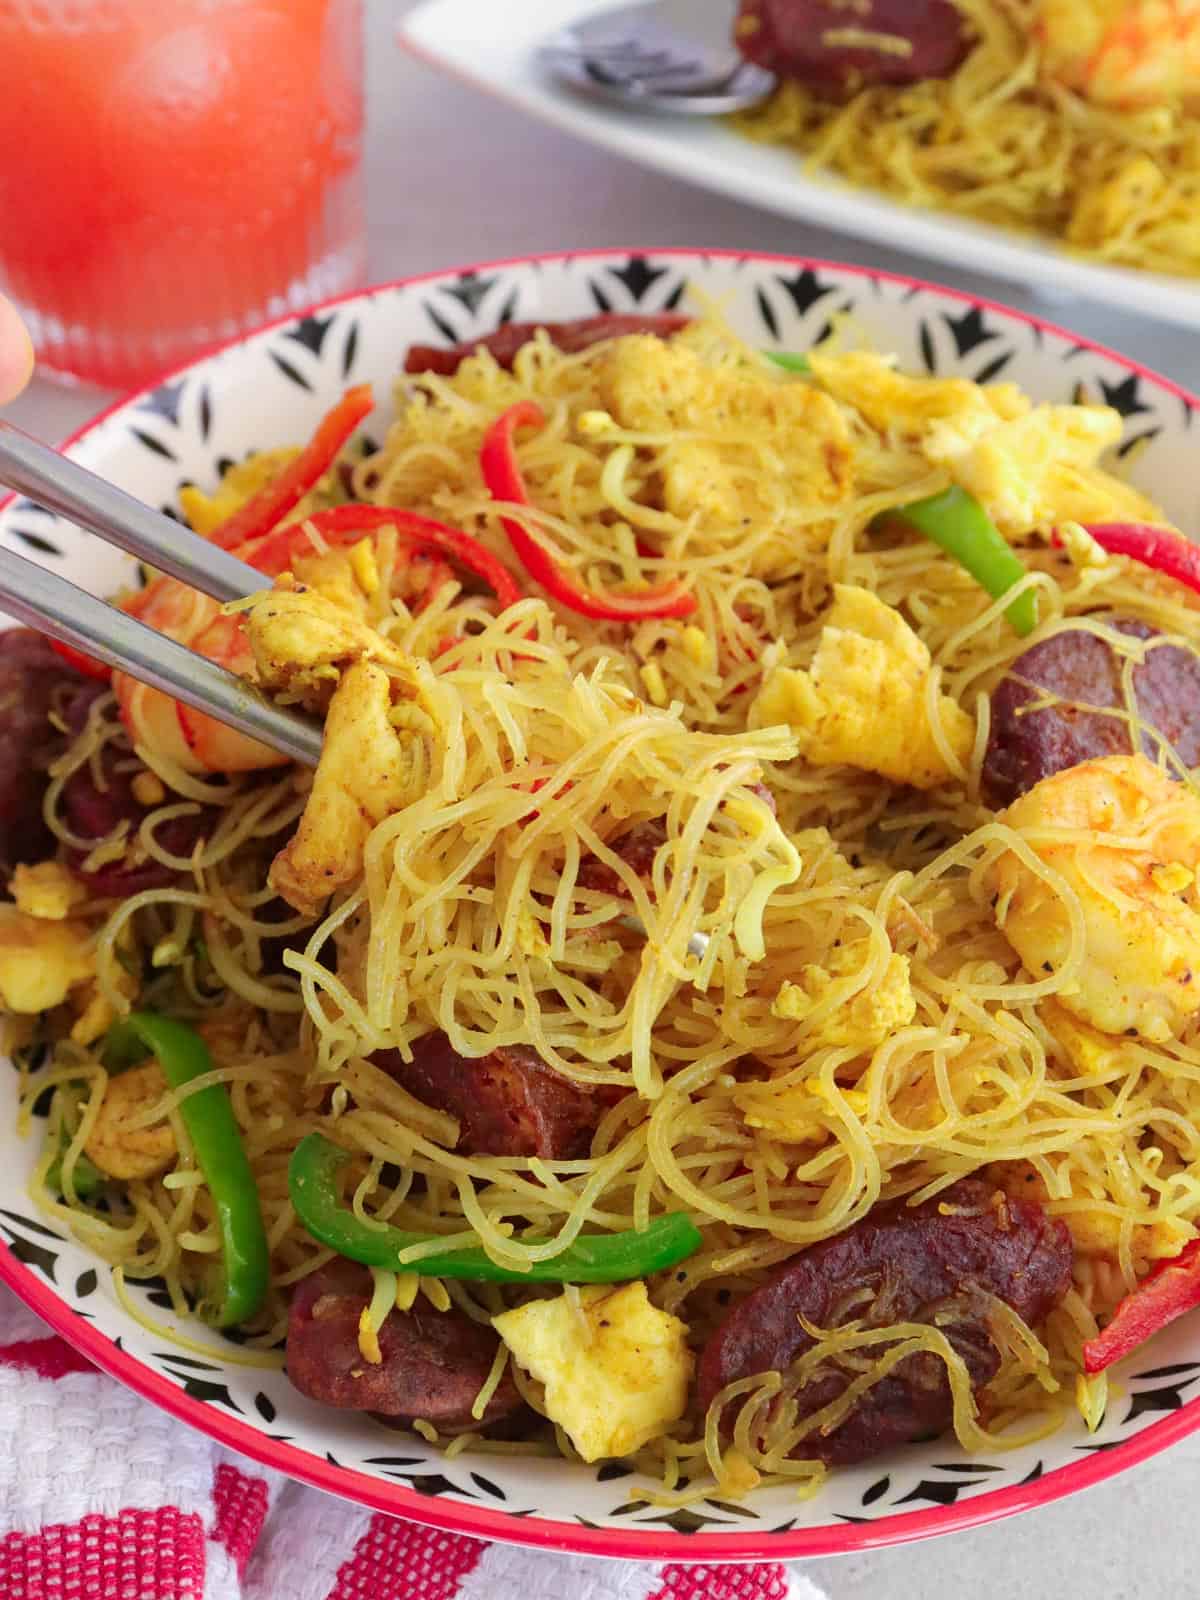 eating Singapore noodles with bell peppers, chicken, and sausage in a bowl.